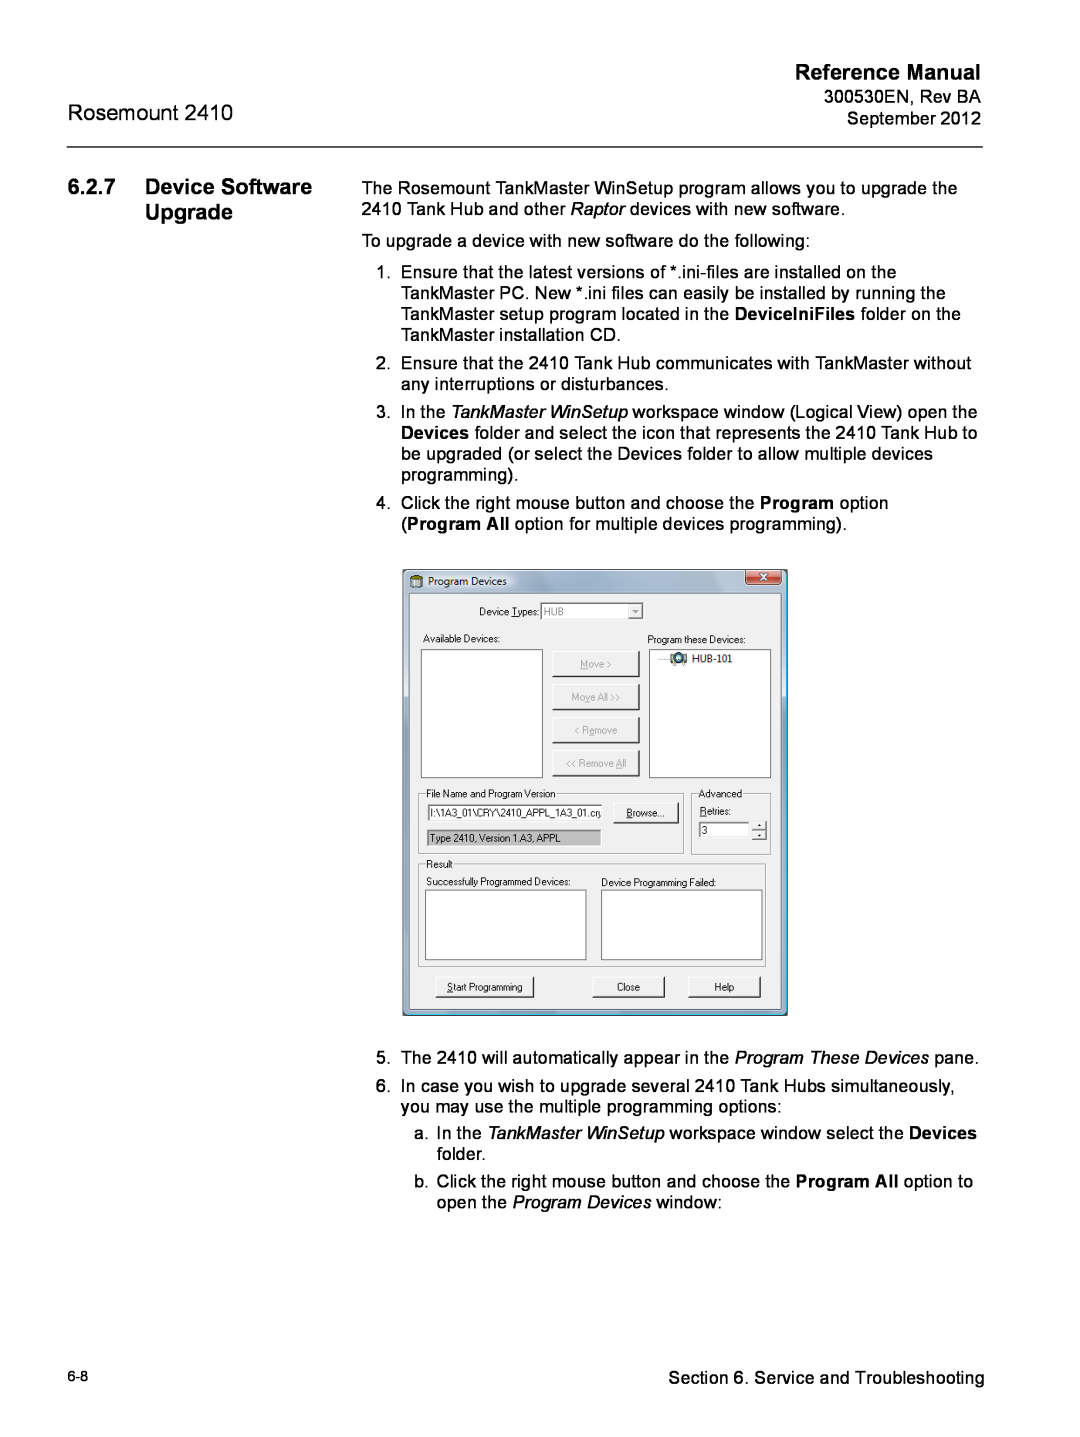 Emerson Process Management Rosemount 2410 manual Device Software Upgrade, Reference Manual 